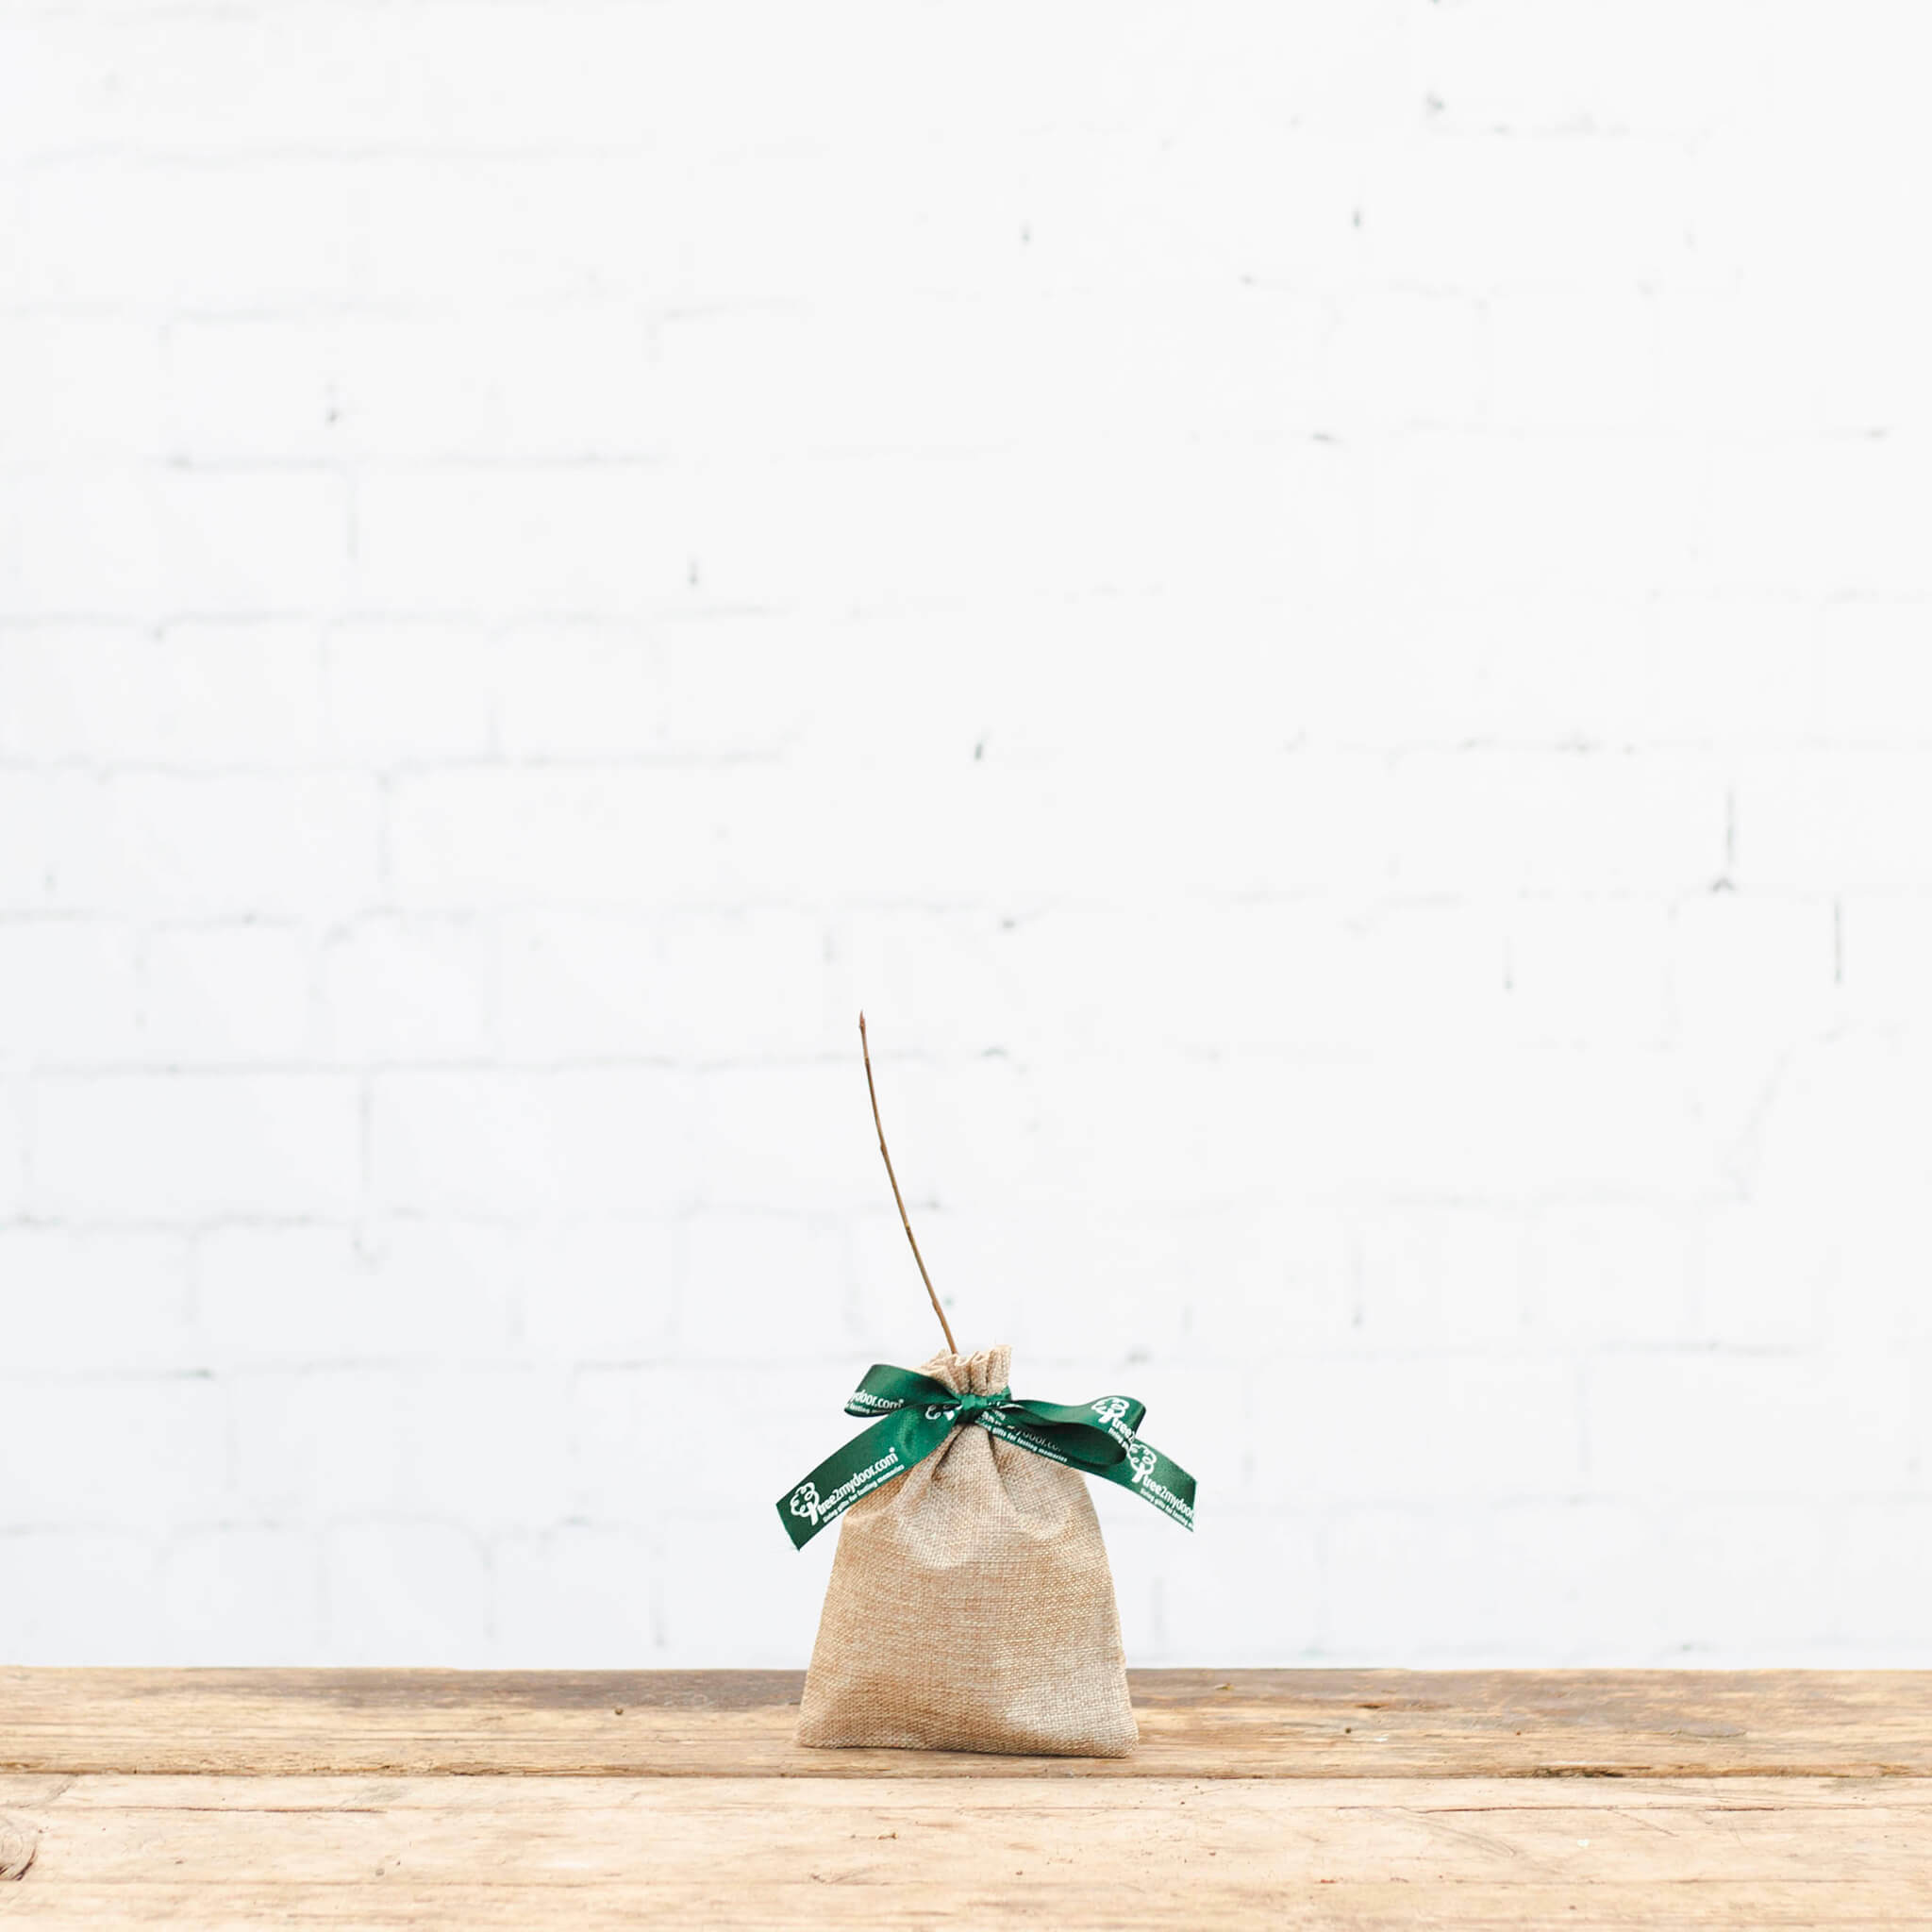 image of a cherry tree sapling with hessian wrap